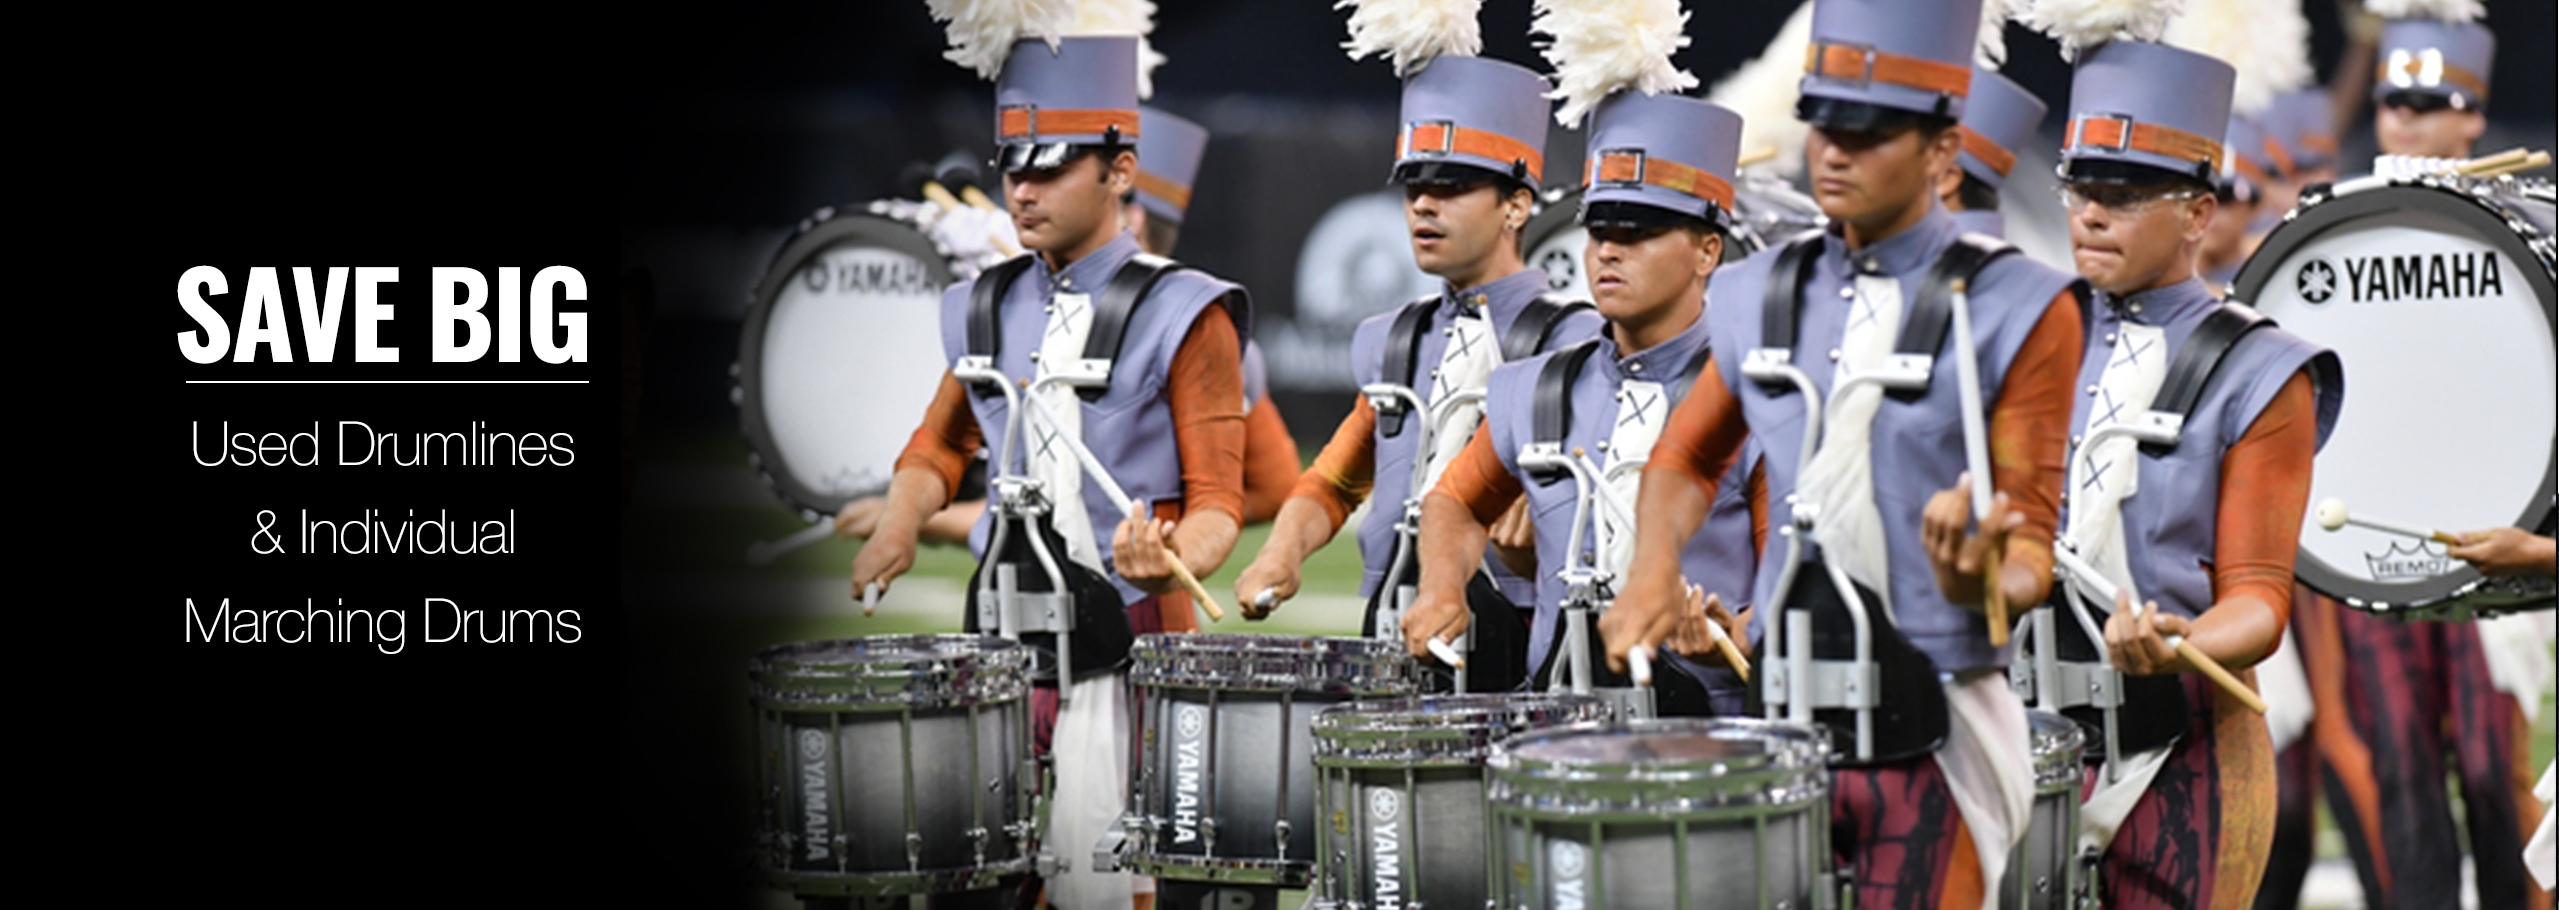 Save Big On Used Drumlines & Individial Marching Drums